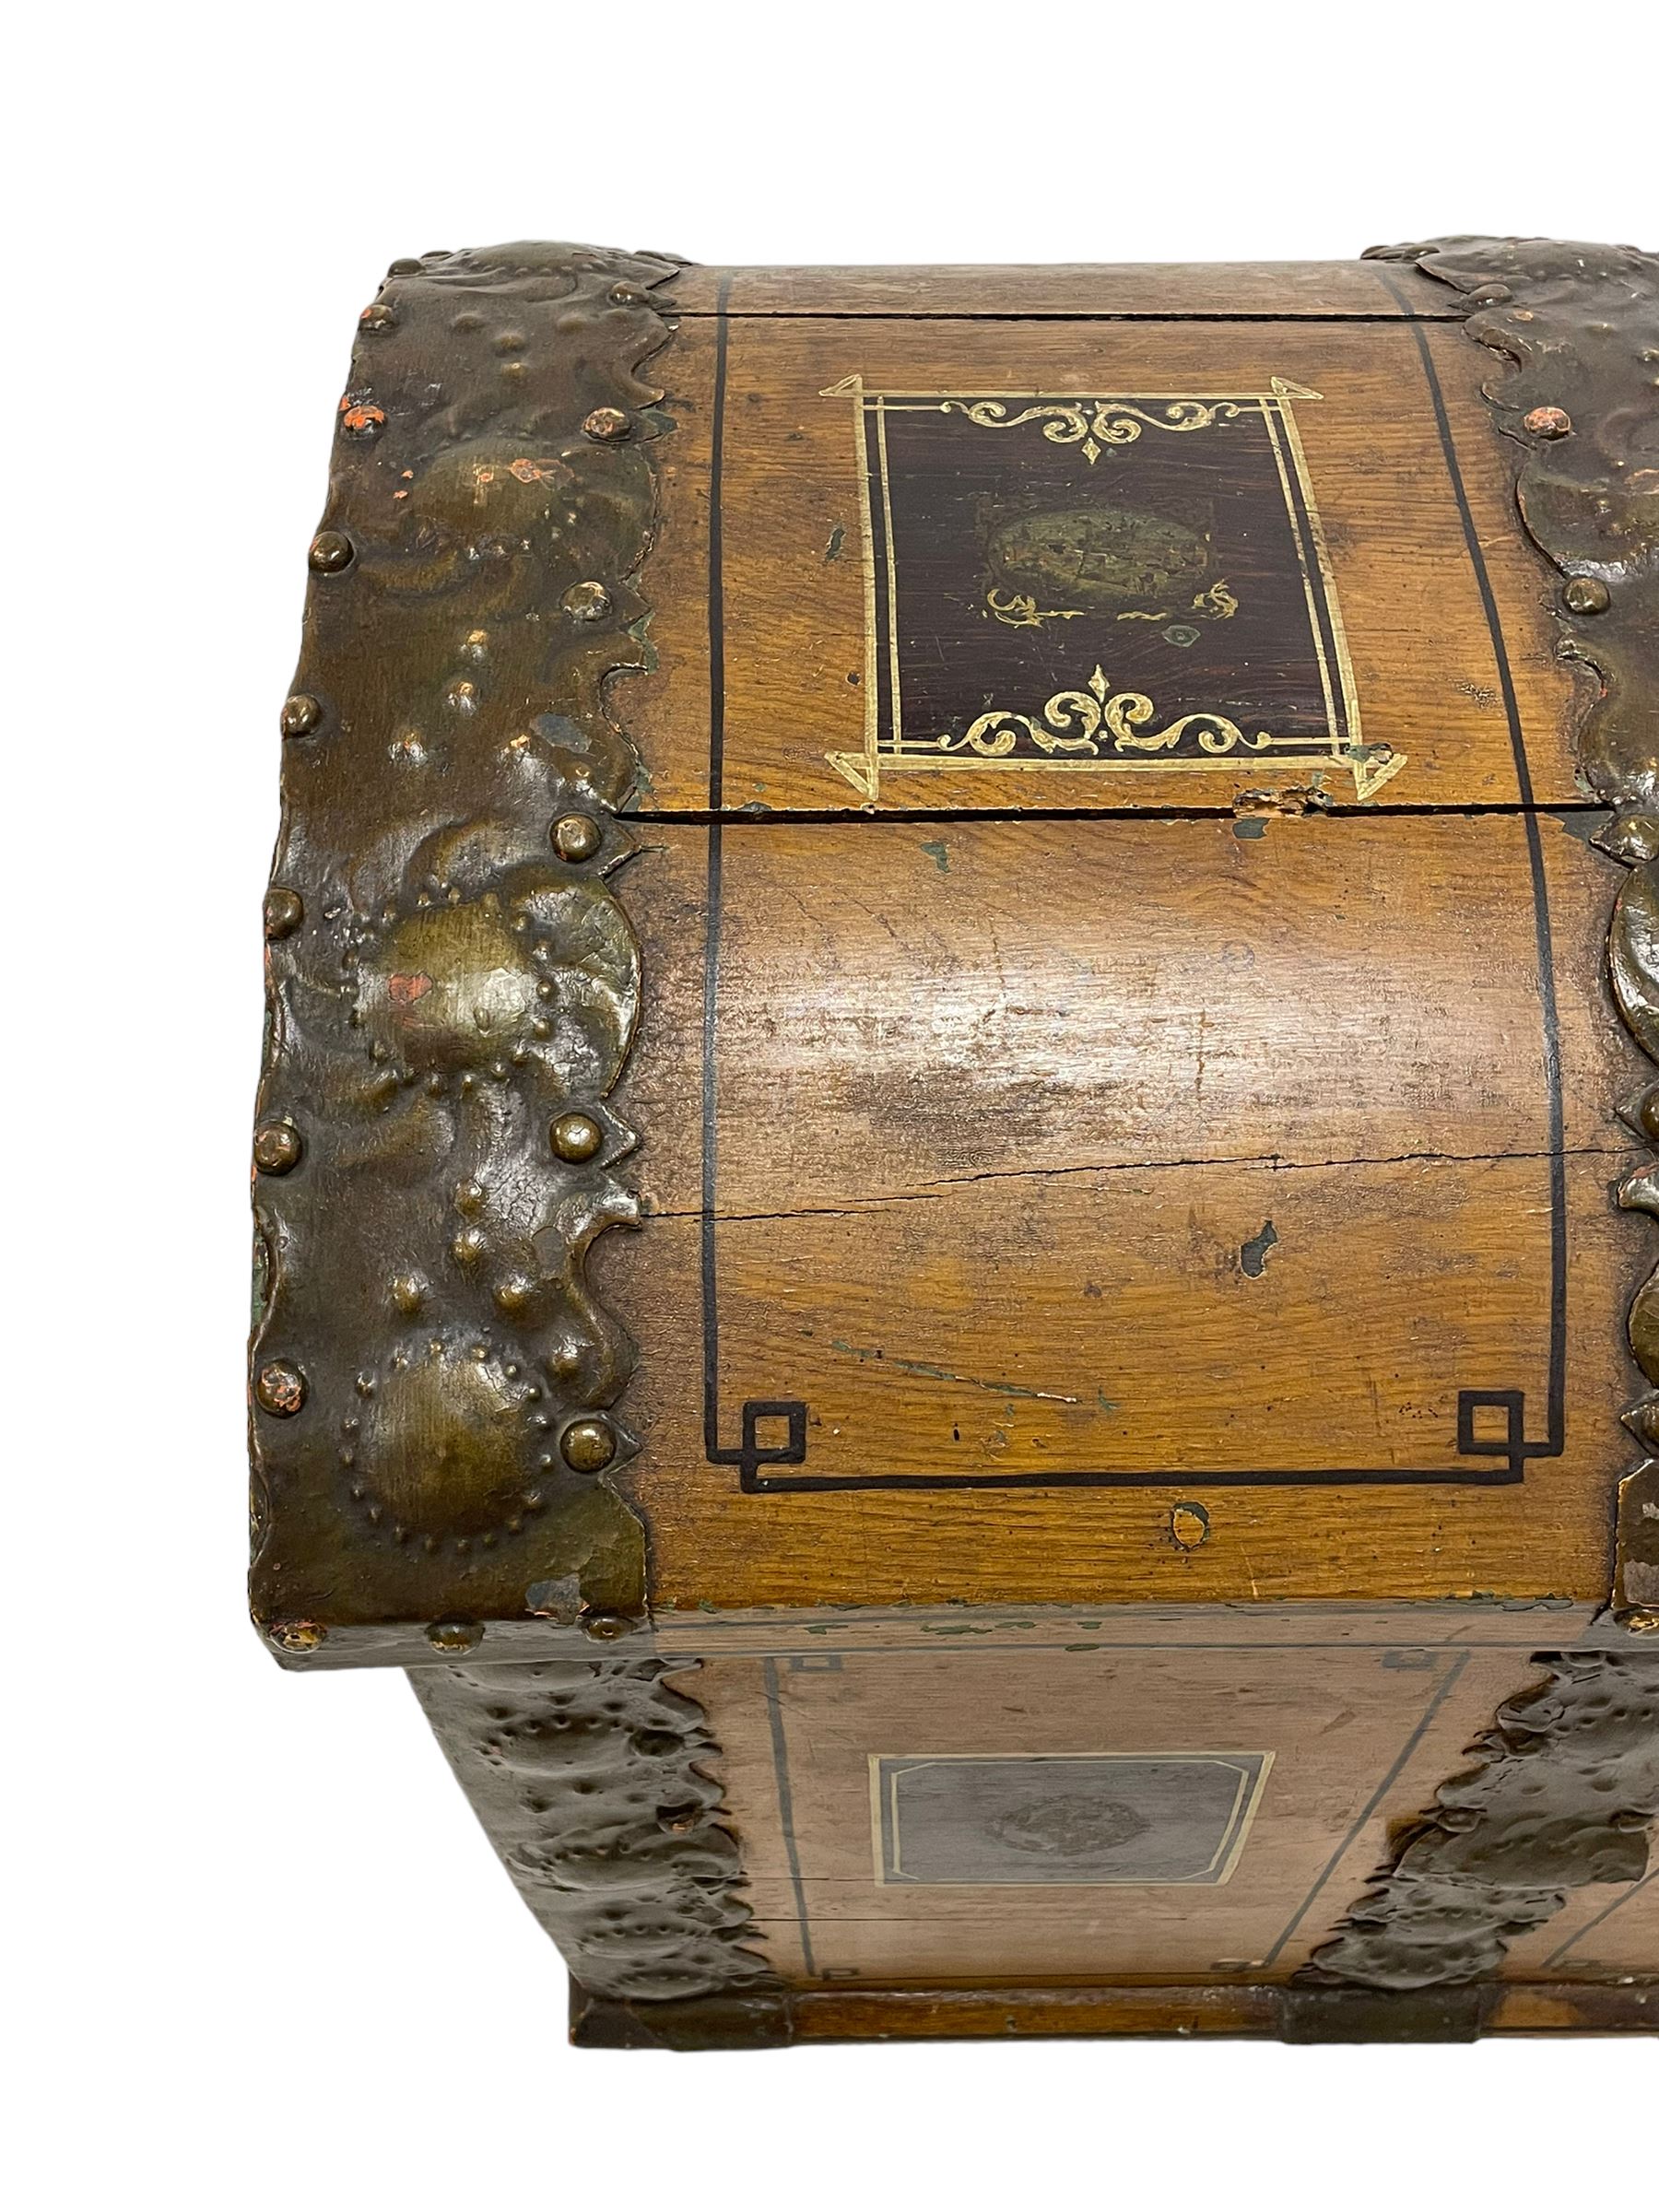 19th century Northern European painted oak sea chest - Image 12 of 29